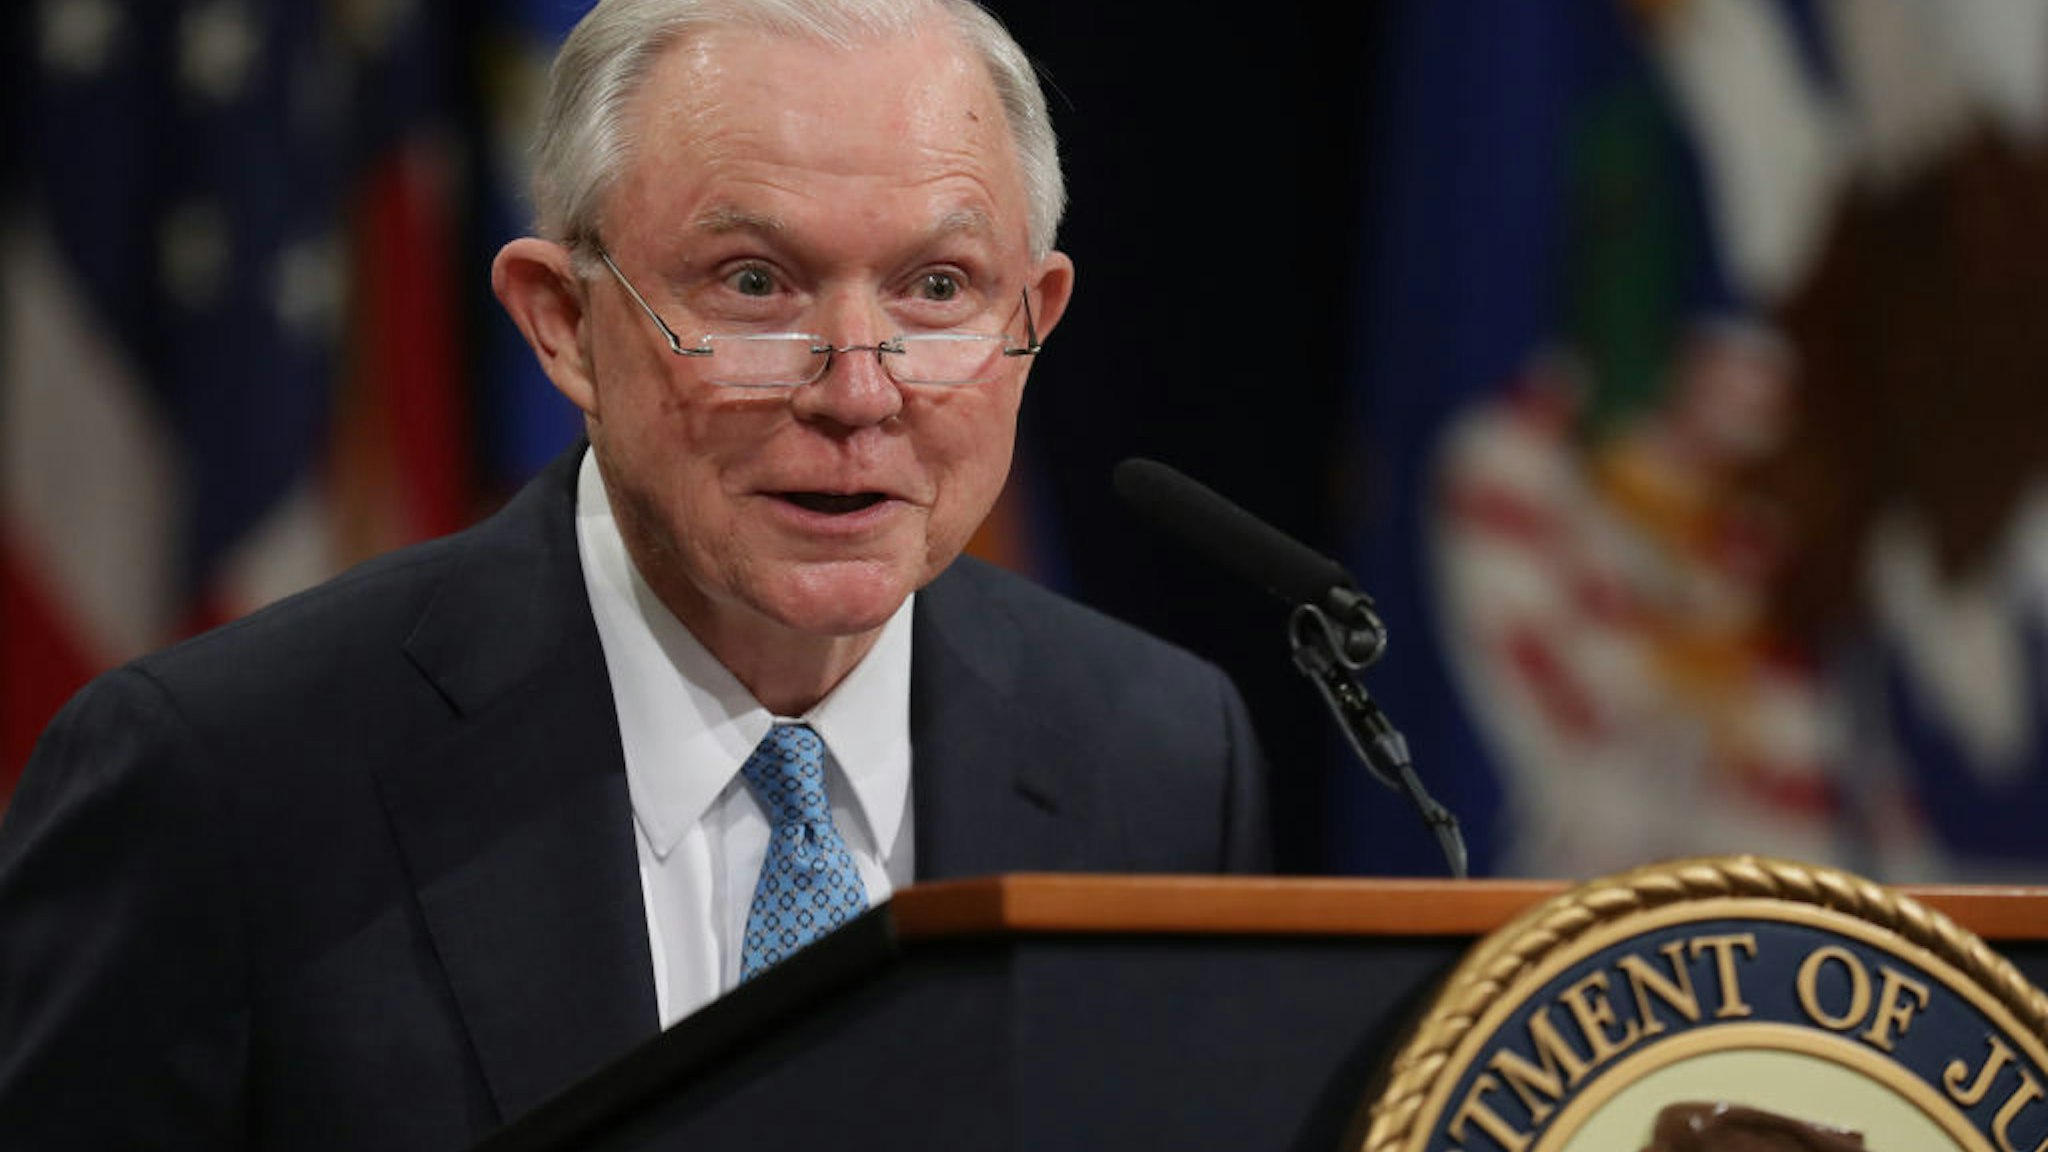 Jeff Sessions delivers remarks during a farewell ceremony for Deputy Attorney General Rod Rosenstein